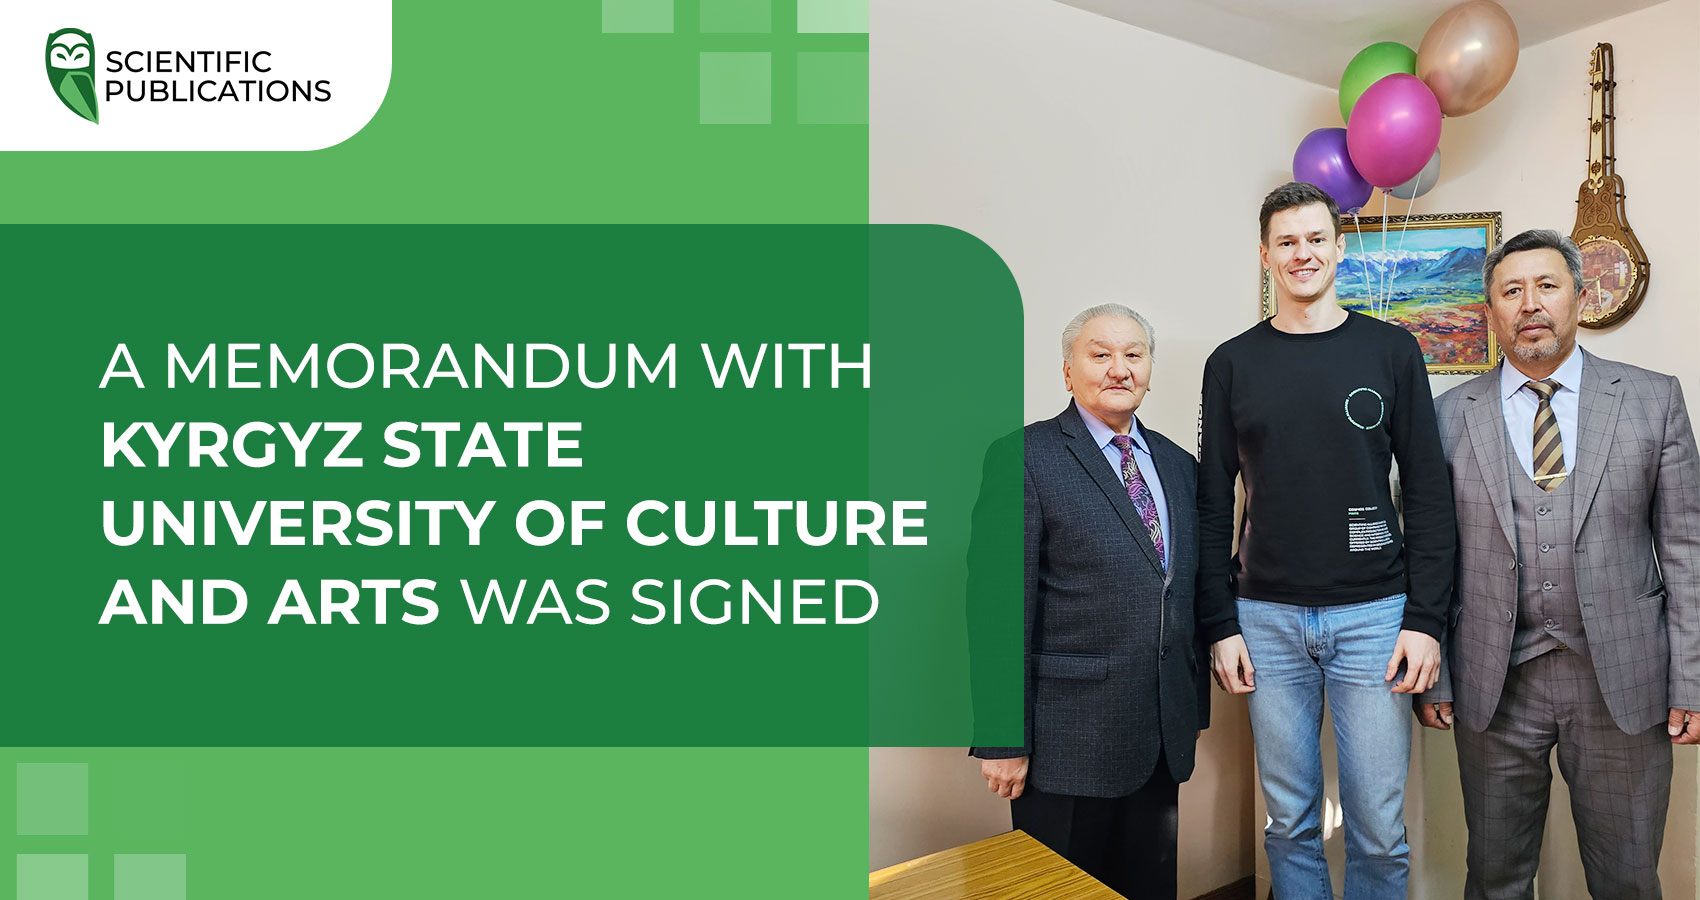 A memorandum has been signed with the Kyrgyz State University of Culture and Arts